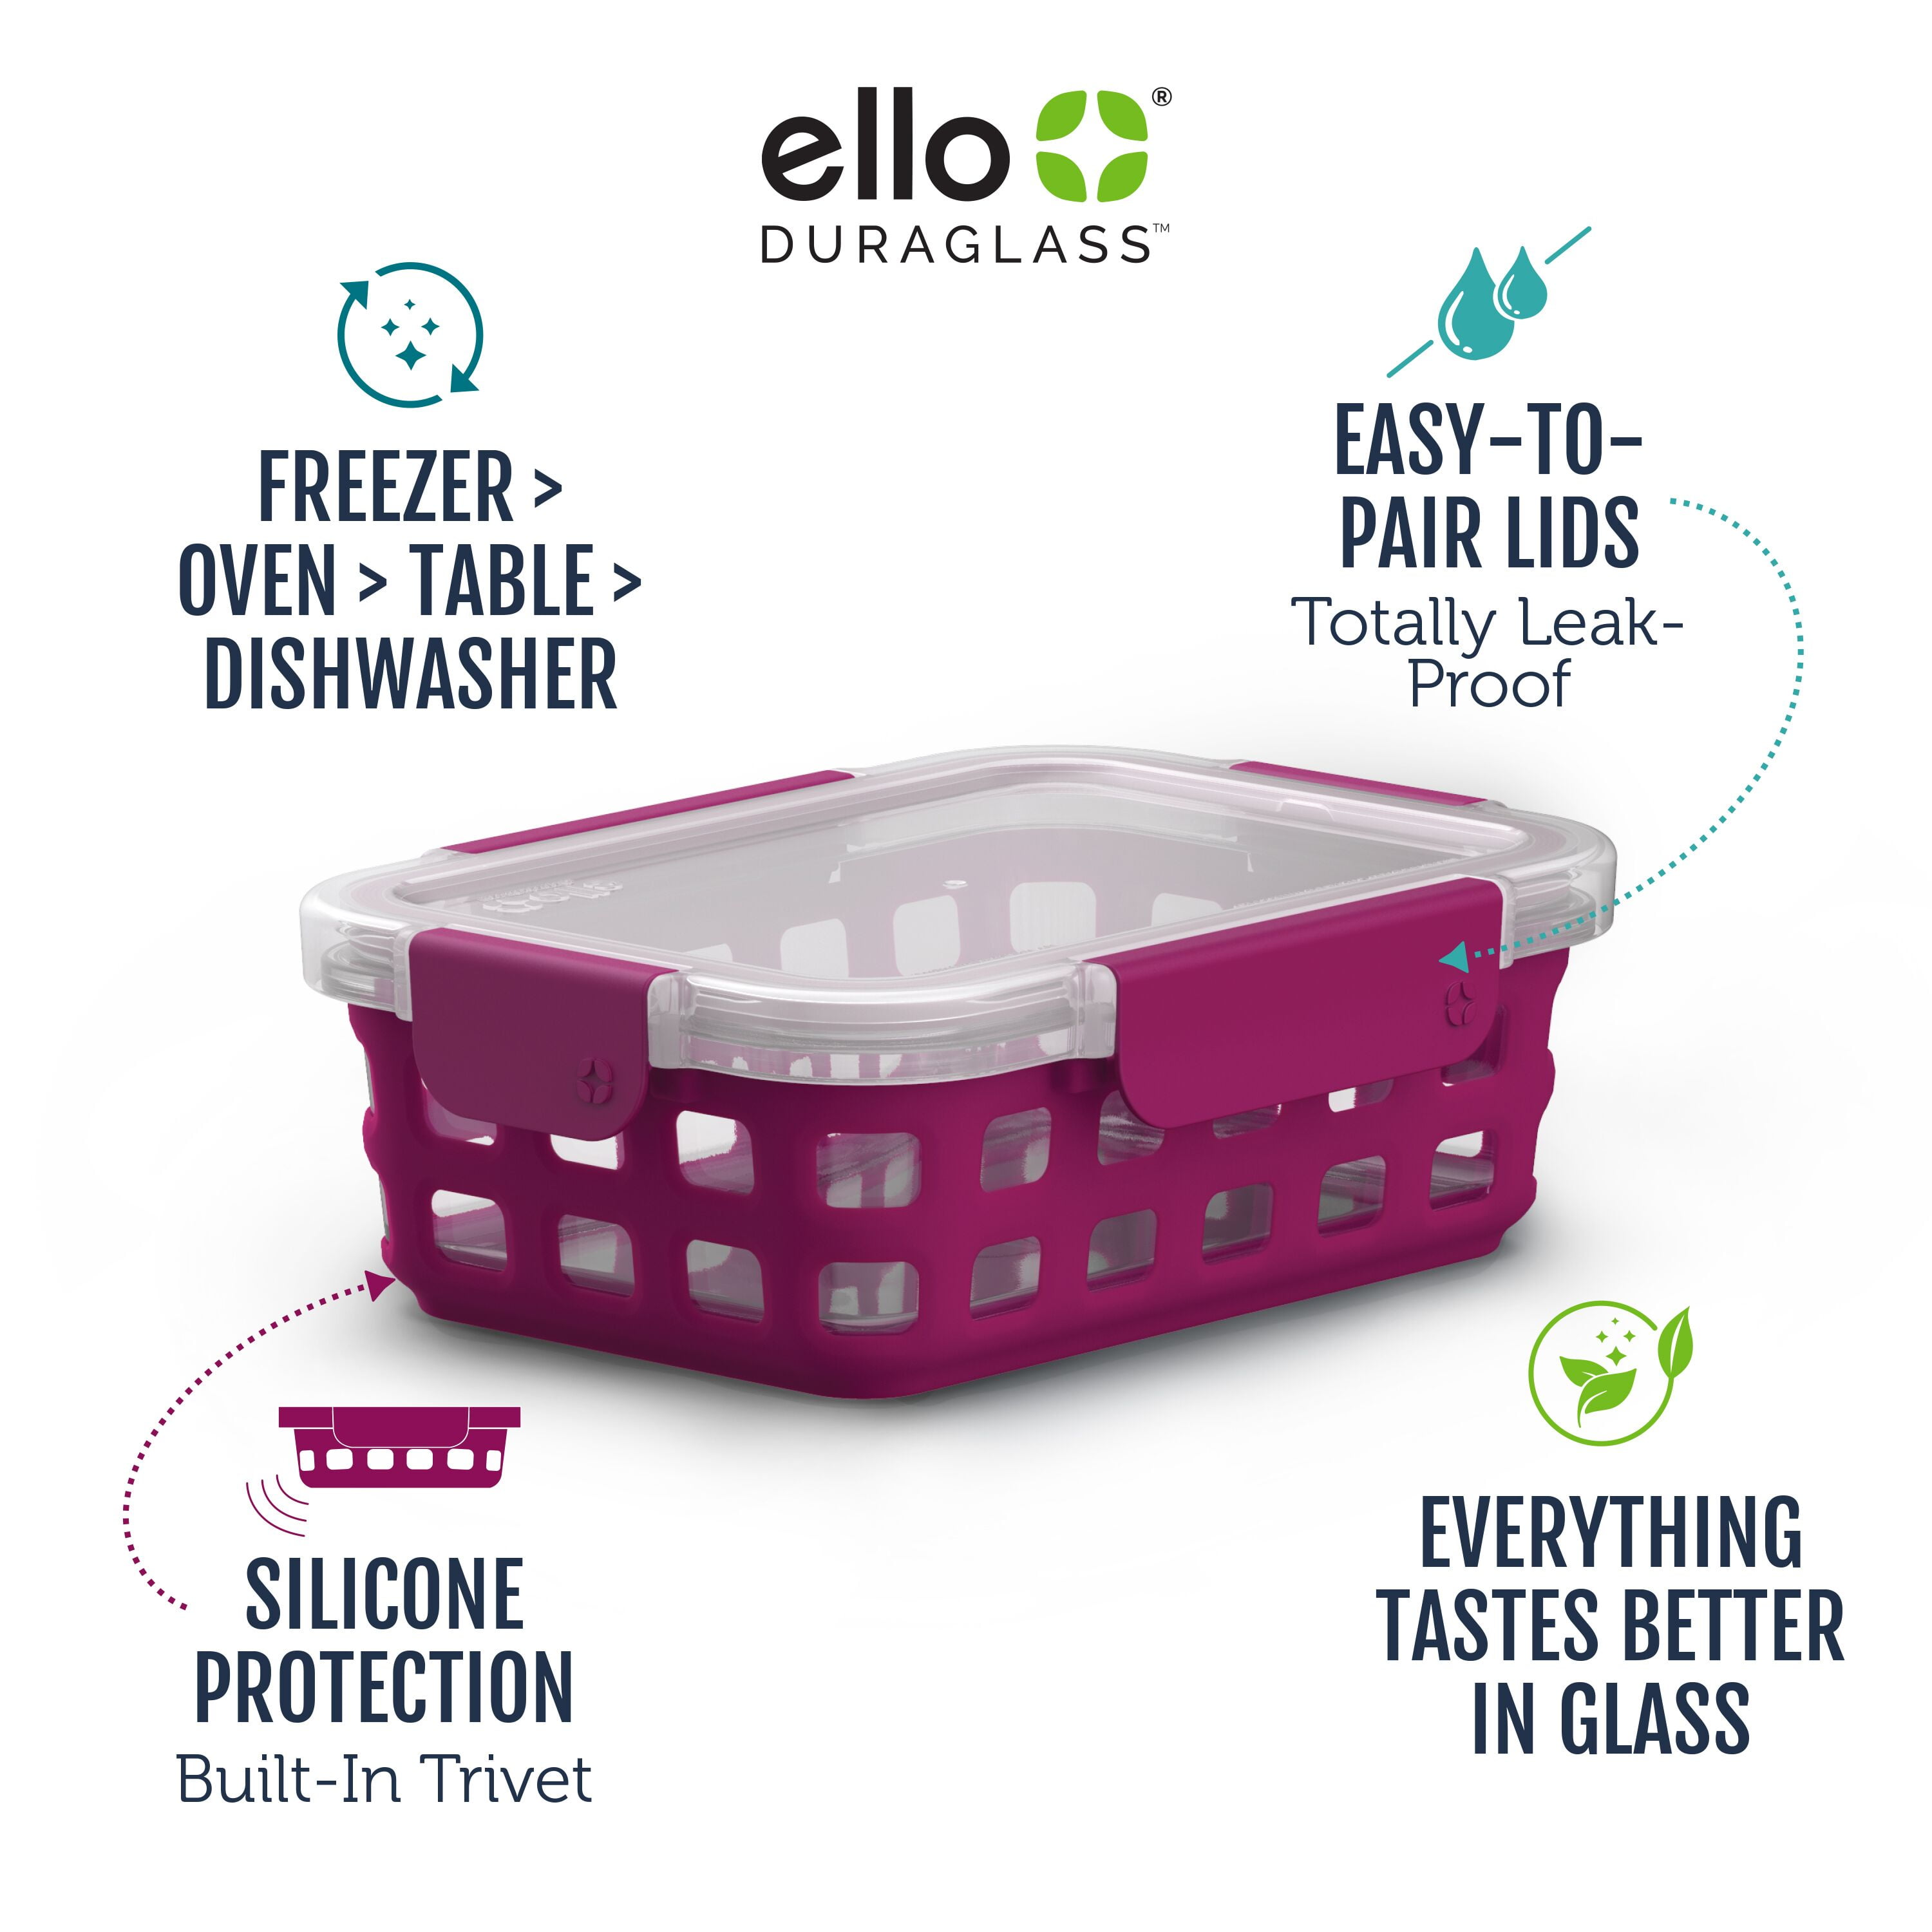 Ello Glass 3.4 Cup 27 Ounce Duraglass Food Storage Meal Prep